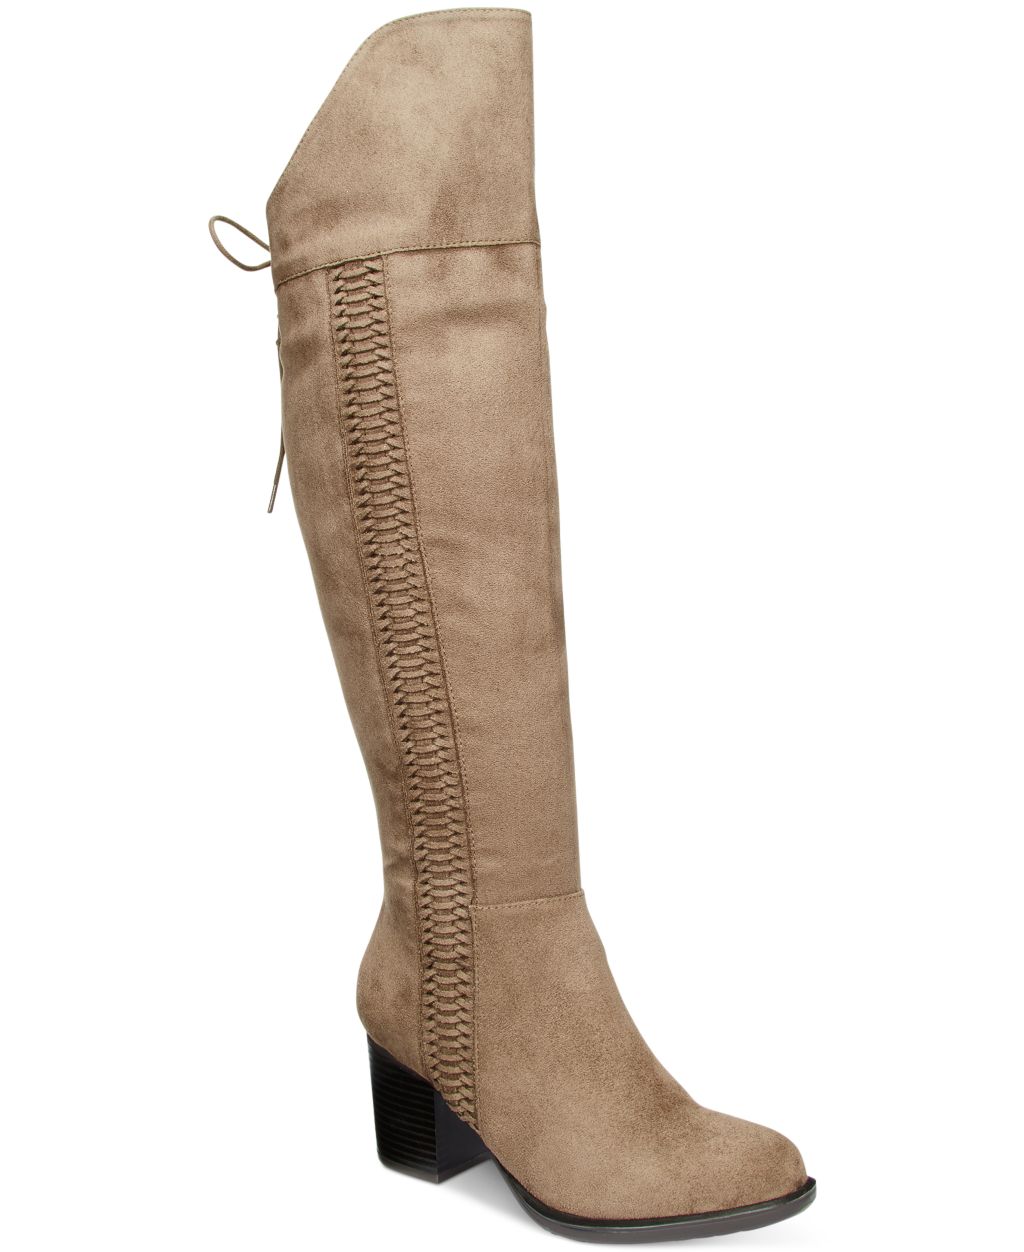 American Rag Shaft Leonna Over-The-Knee Boots, Only at Macy's